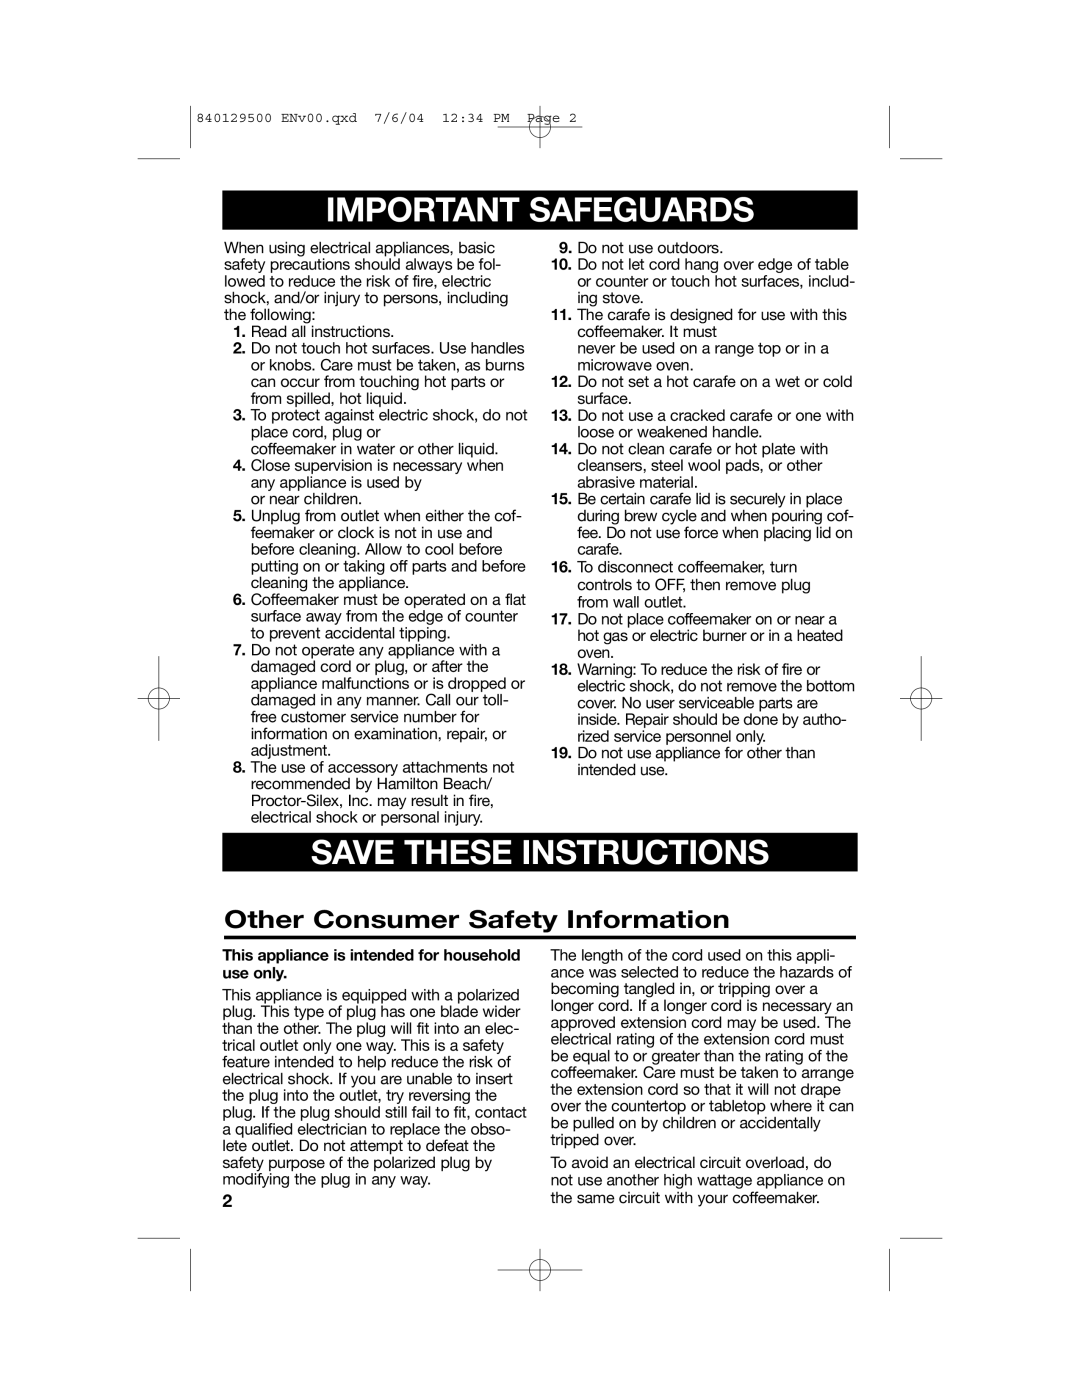 Hamilton Beach Programmable Coffeemaker Important Safeguards, Save These Instructions, Other Consumer Safety Information 